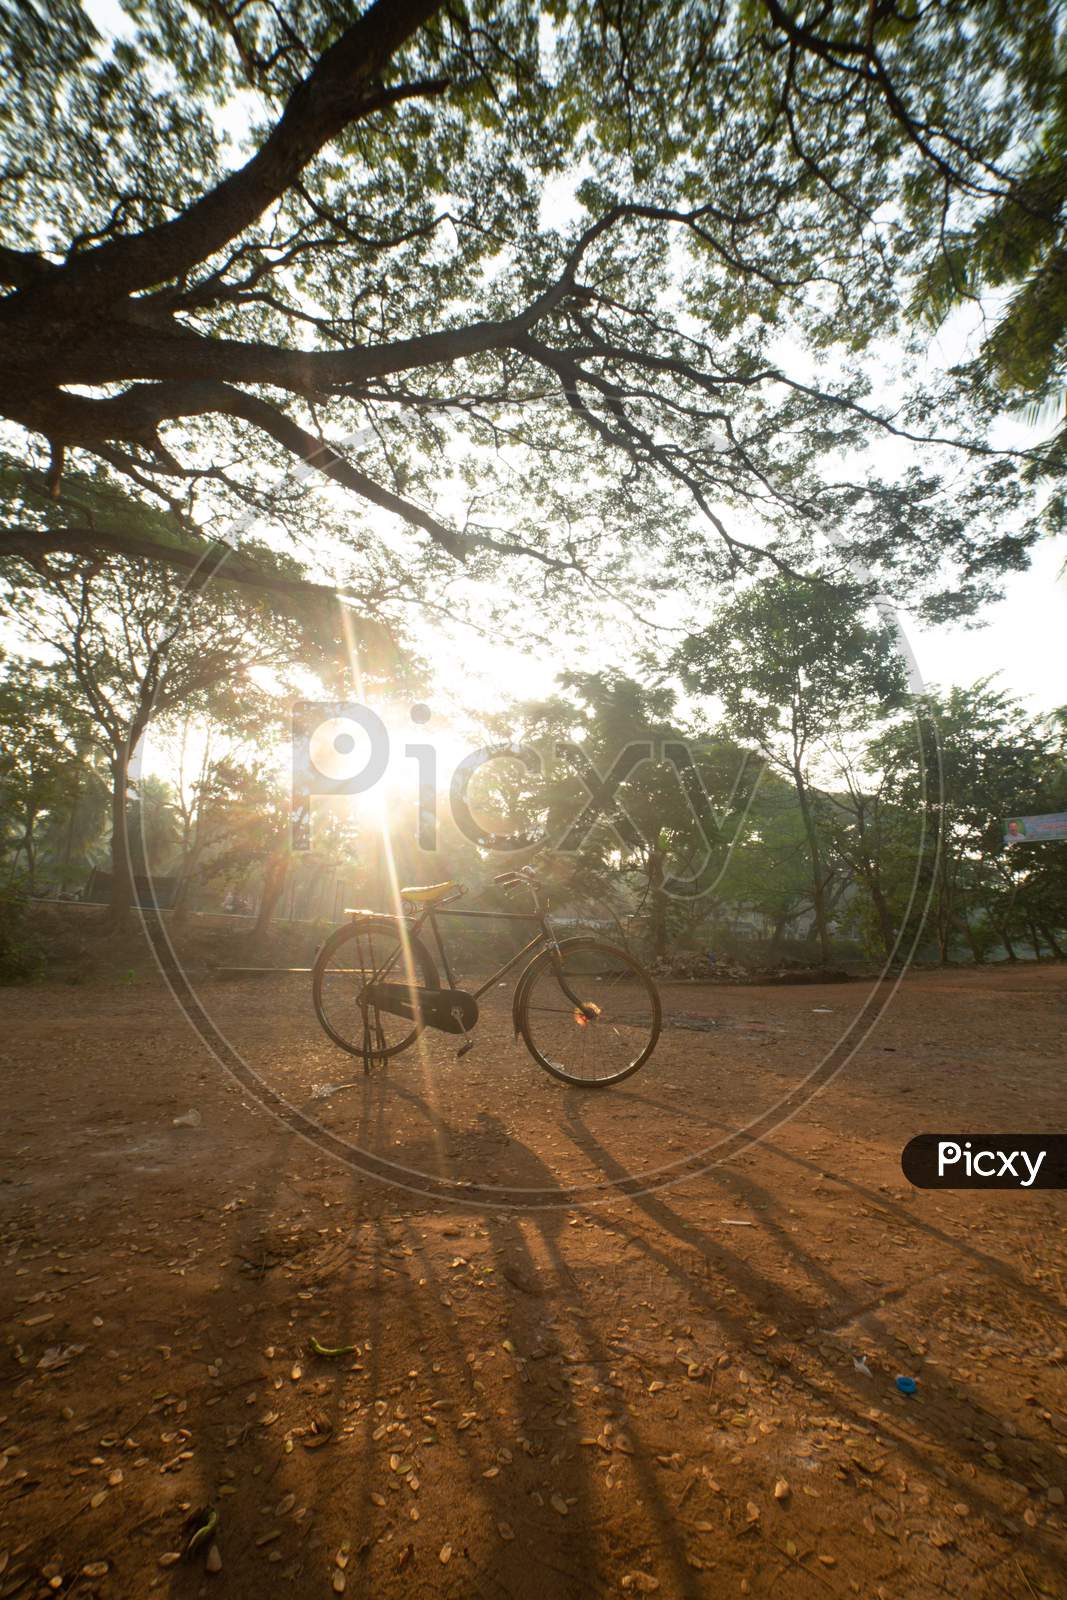 A Bicycle during morning light